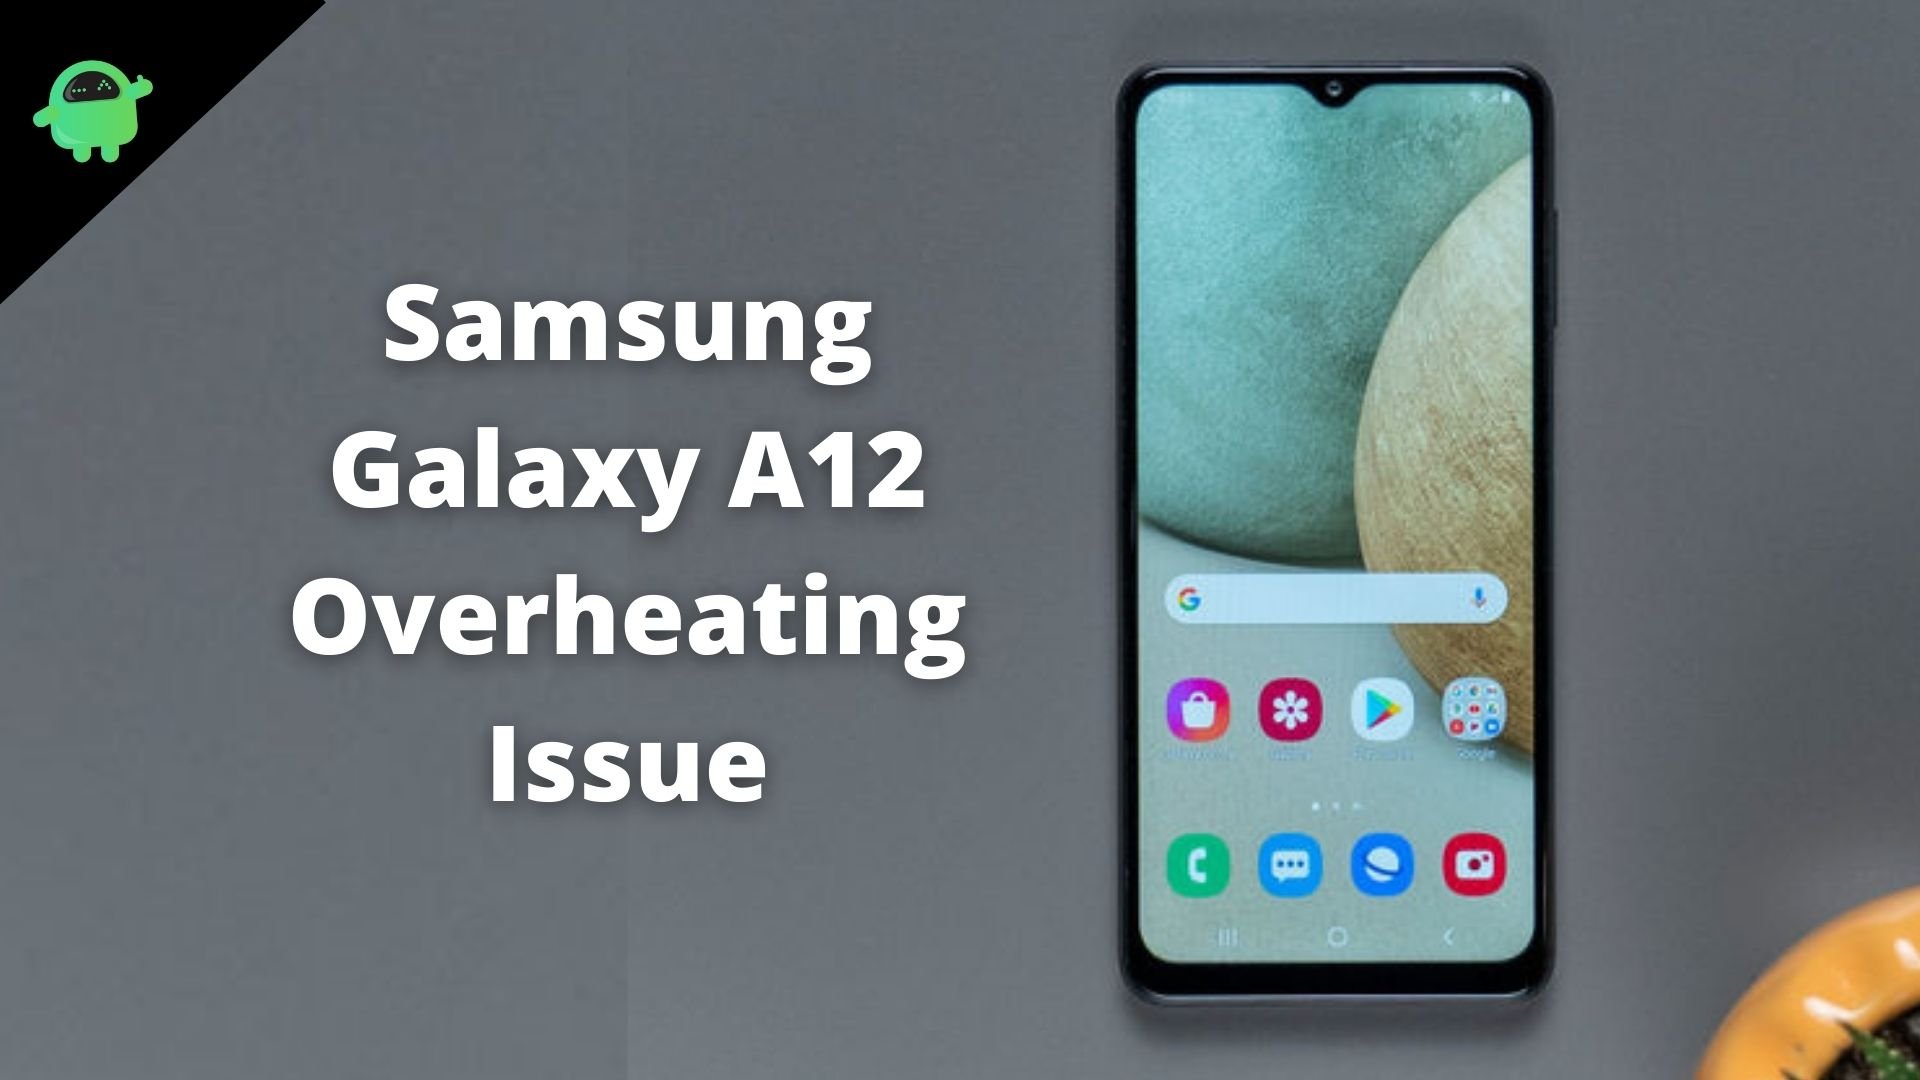 Samsung Galaxy A12 Overheating Issue